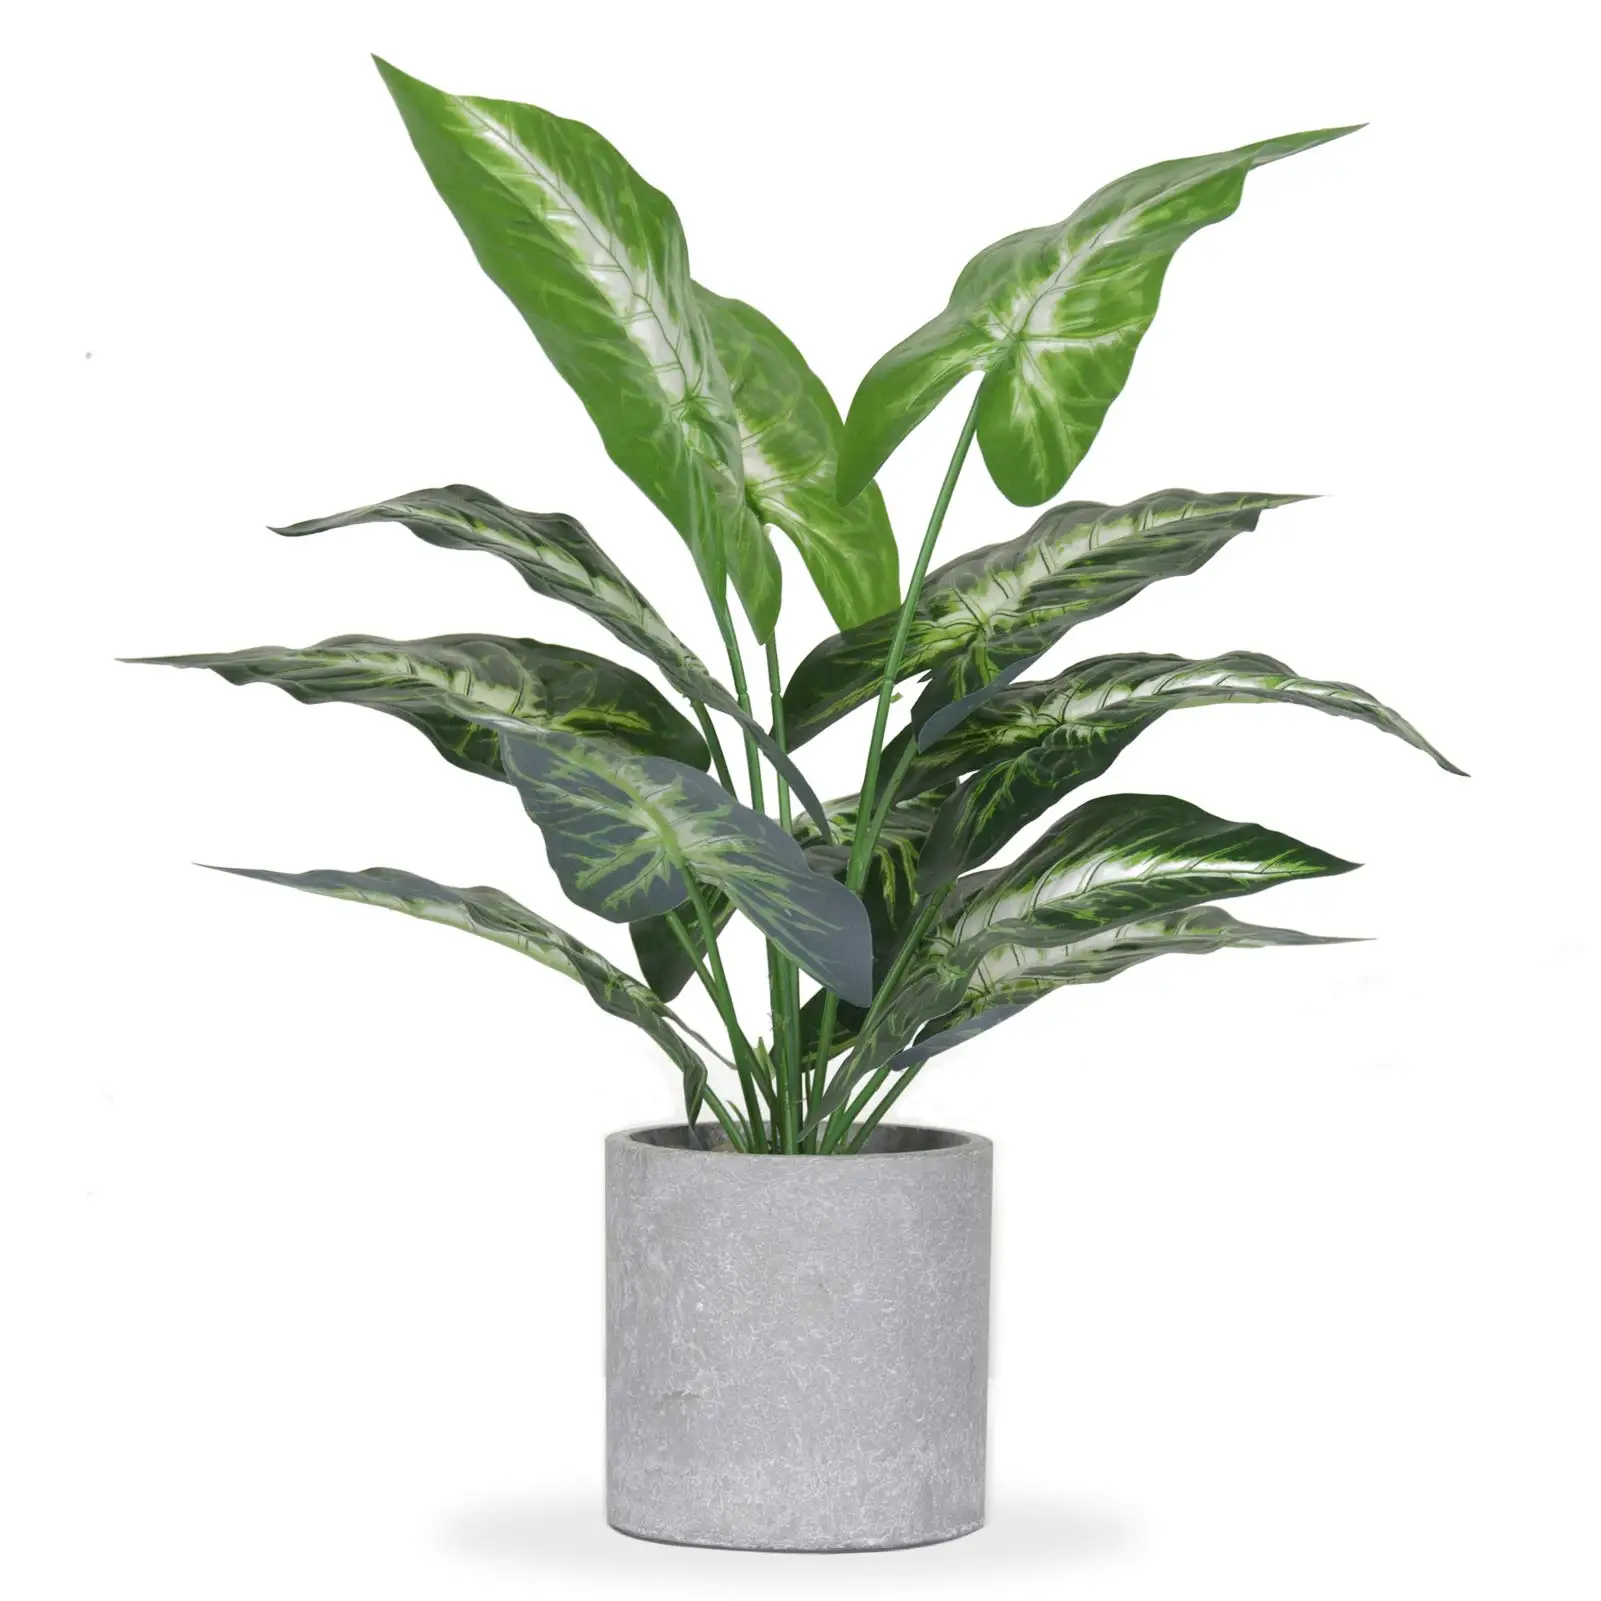 Small Potted Artificial Plants Plastic Fake Greenery Faux Plants In Pots  for Rustic Home Farmhouse Bathroom Kitchen Home Decor - AliExpress